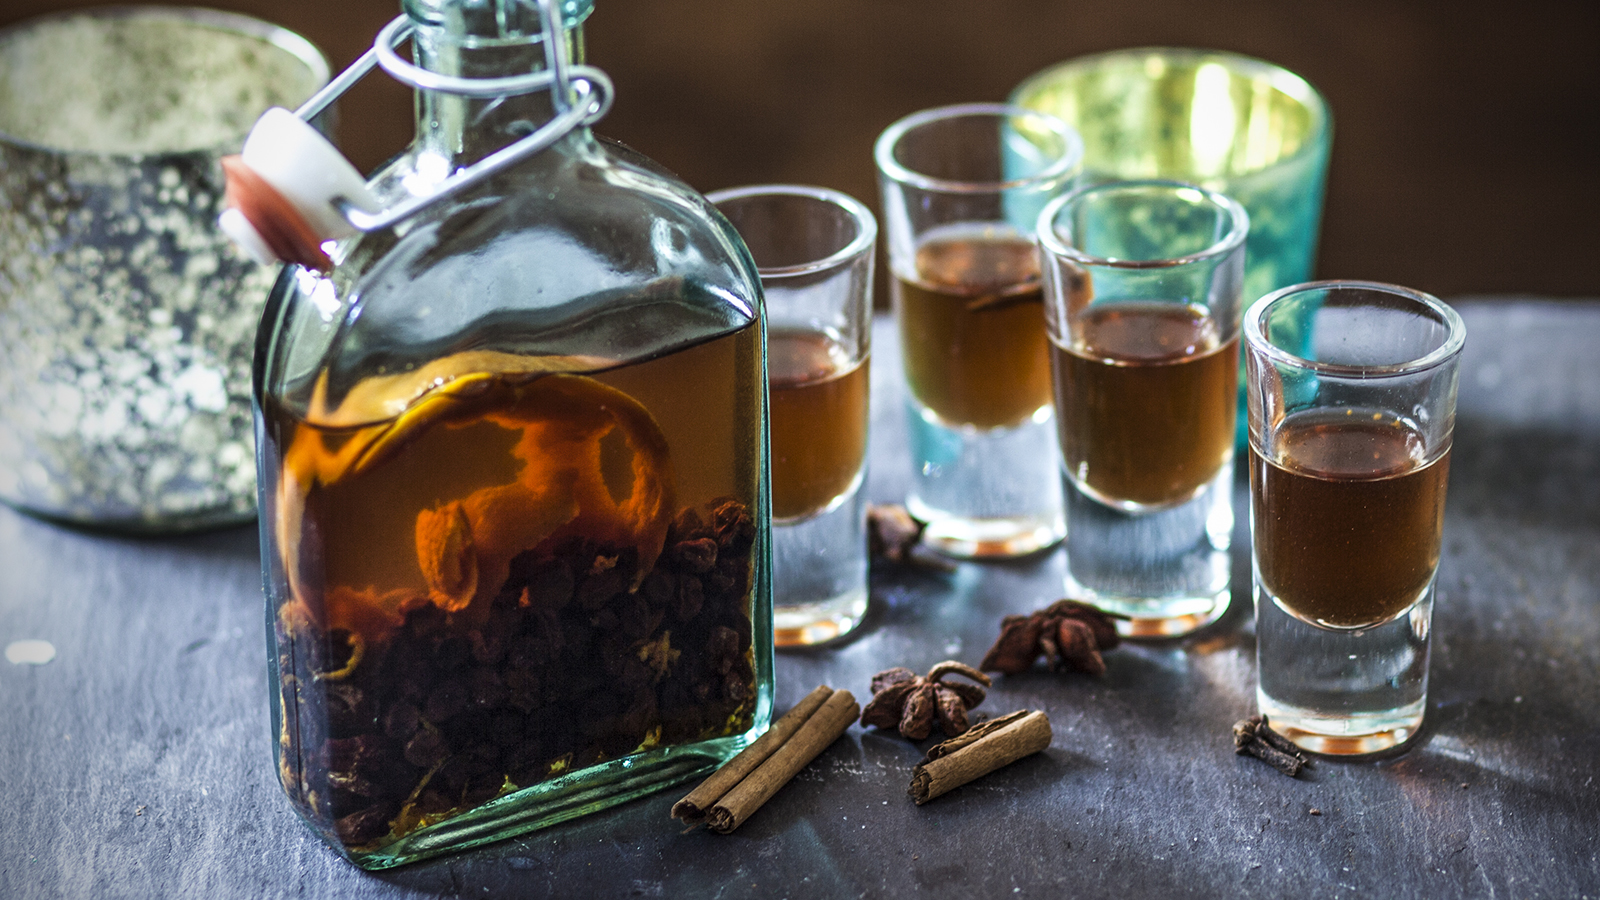 https://food-images.files.bbci.co.uk/food/recipes/christmas_pudding_vodka_45343_16x9.jpg